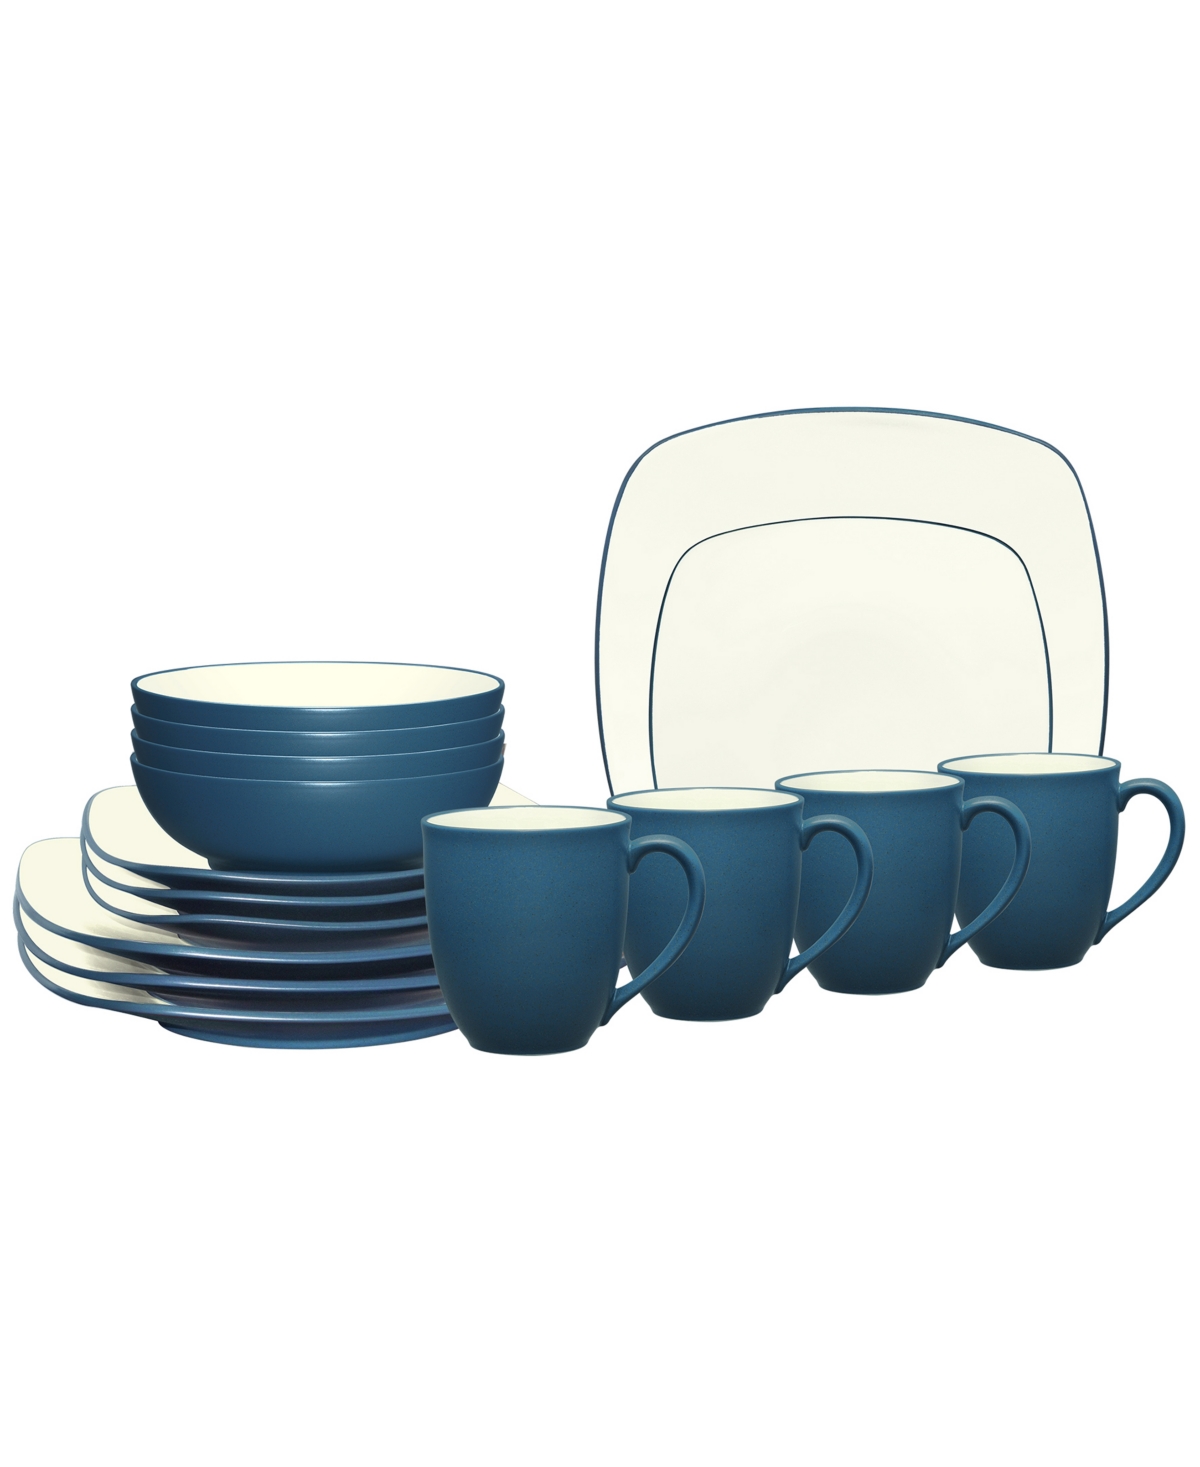 Colorwave Square 16-Pc. Dinnerware Set, Service for 4 - Naked